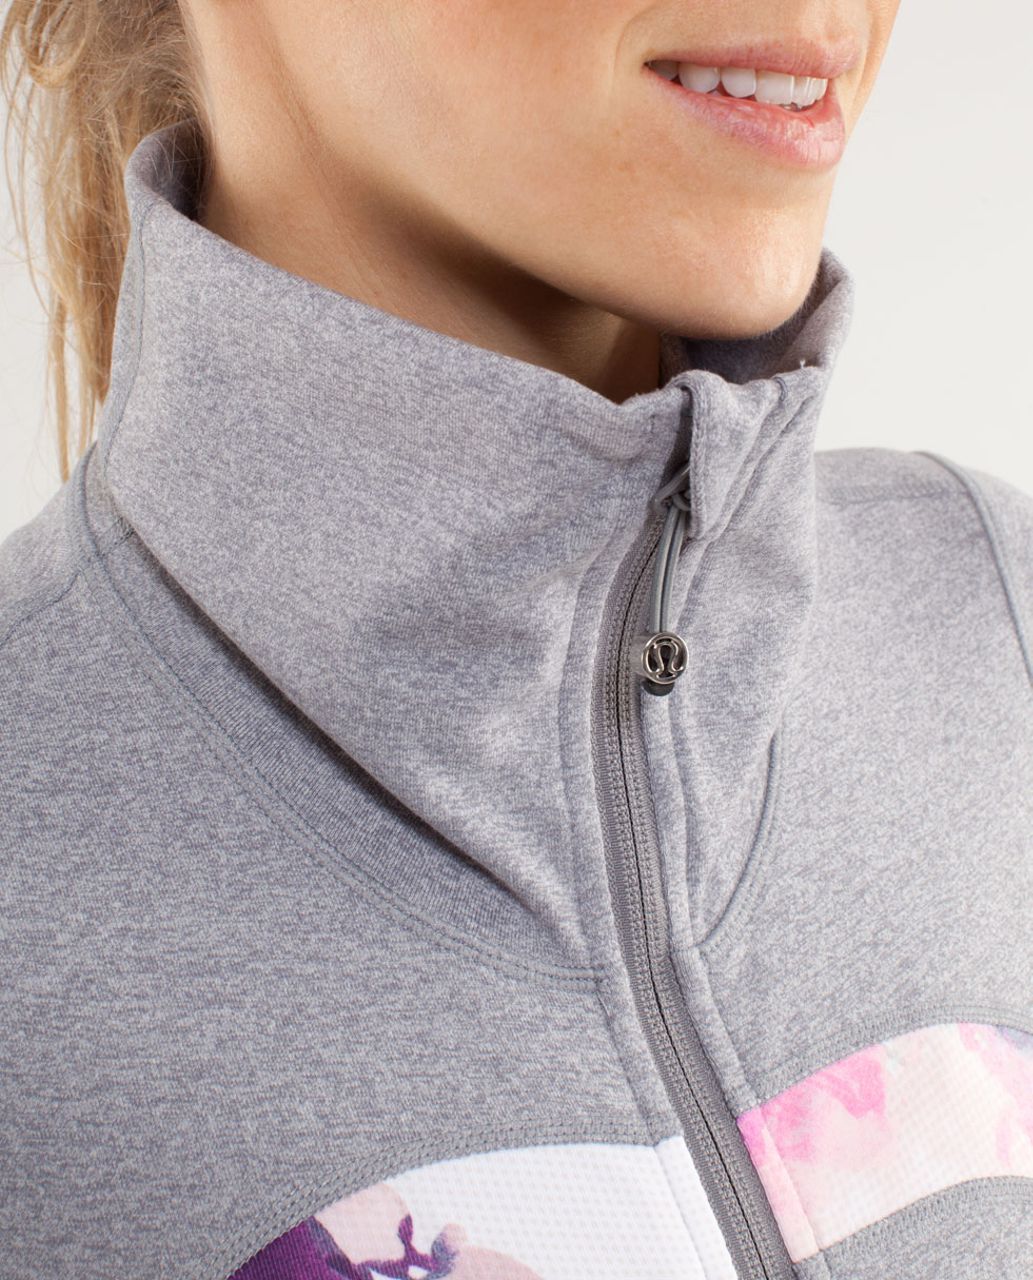 Lululemon In Stride Jacket - Heathered Fossil /  Blurred Blossoms White  /  Heathered Fossil